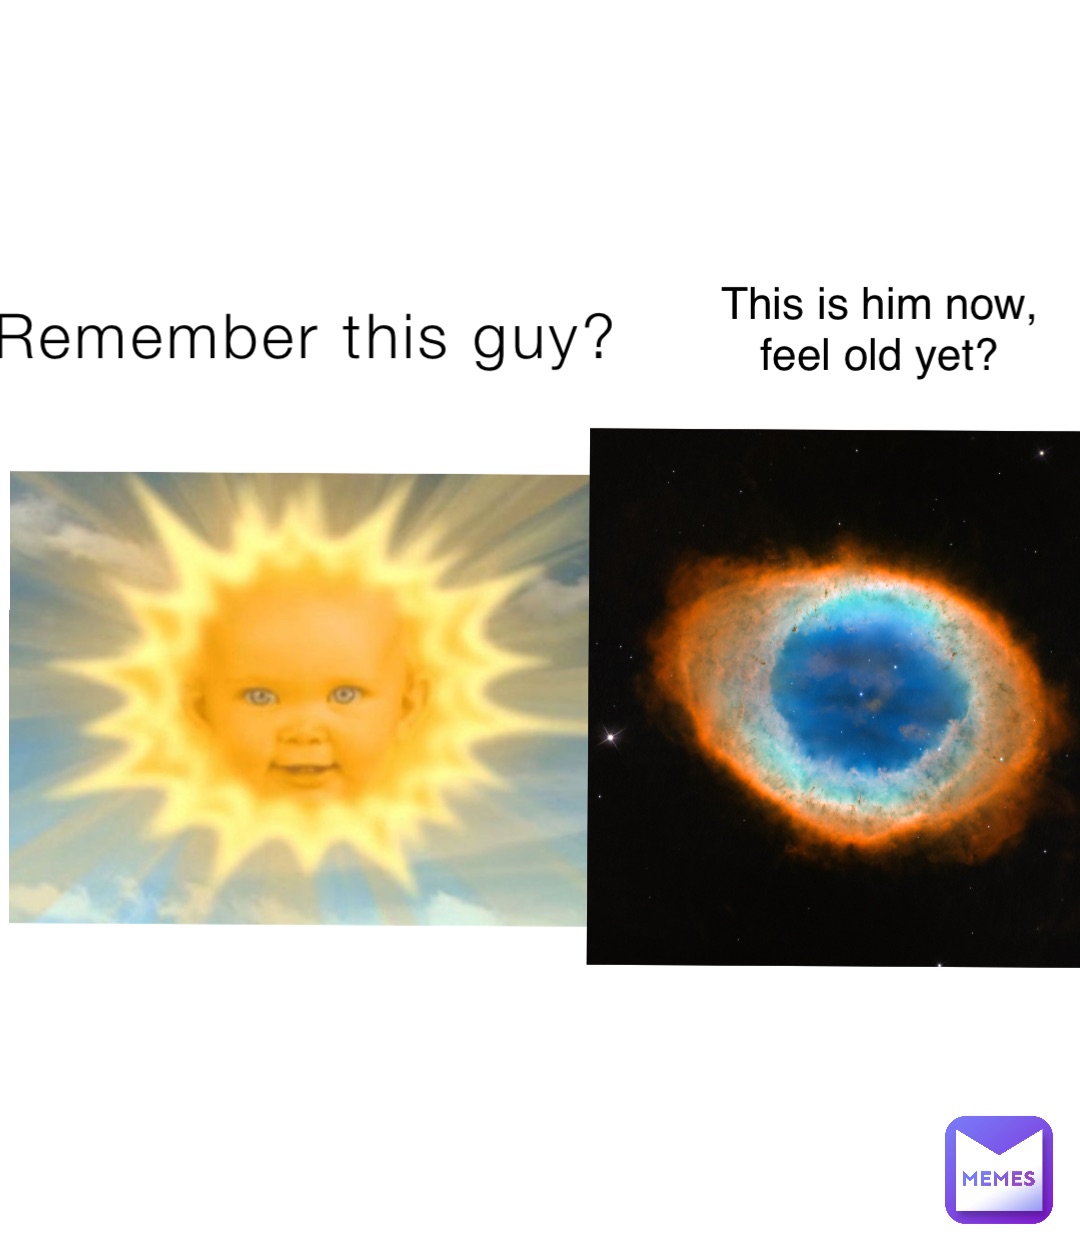 Remember this guy? This is him now, feel old yet?